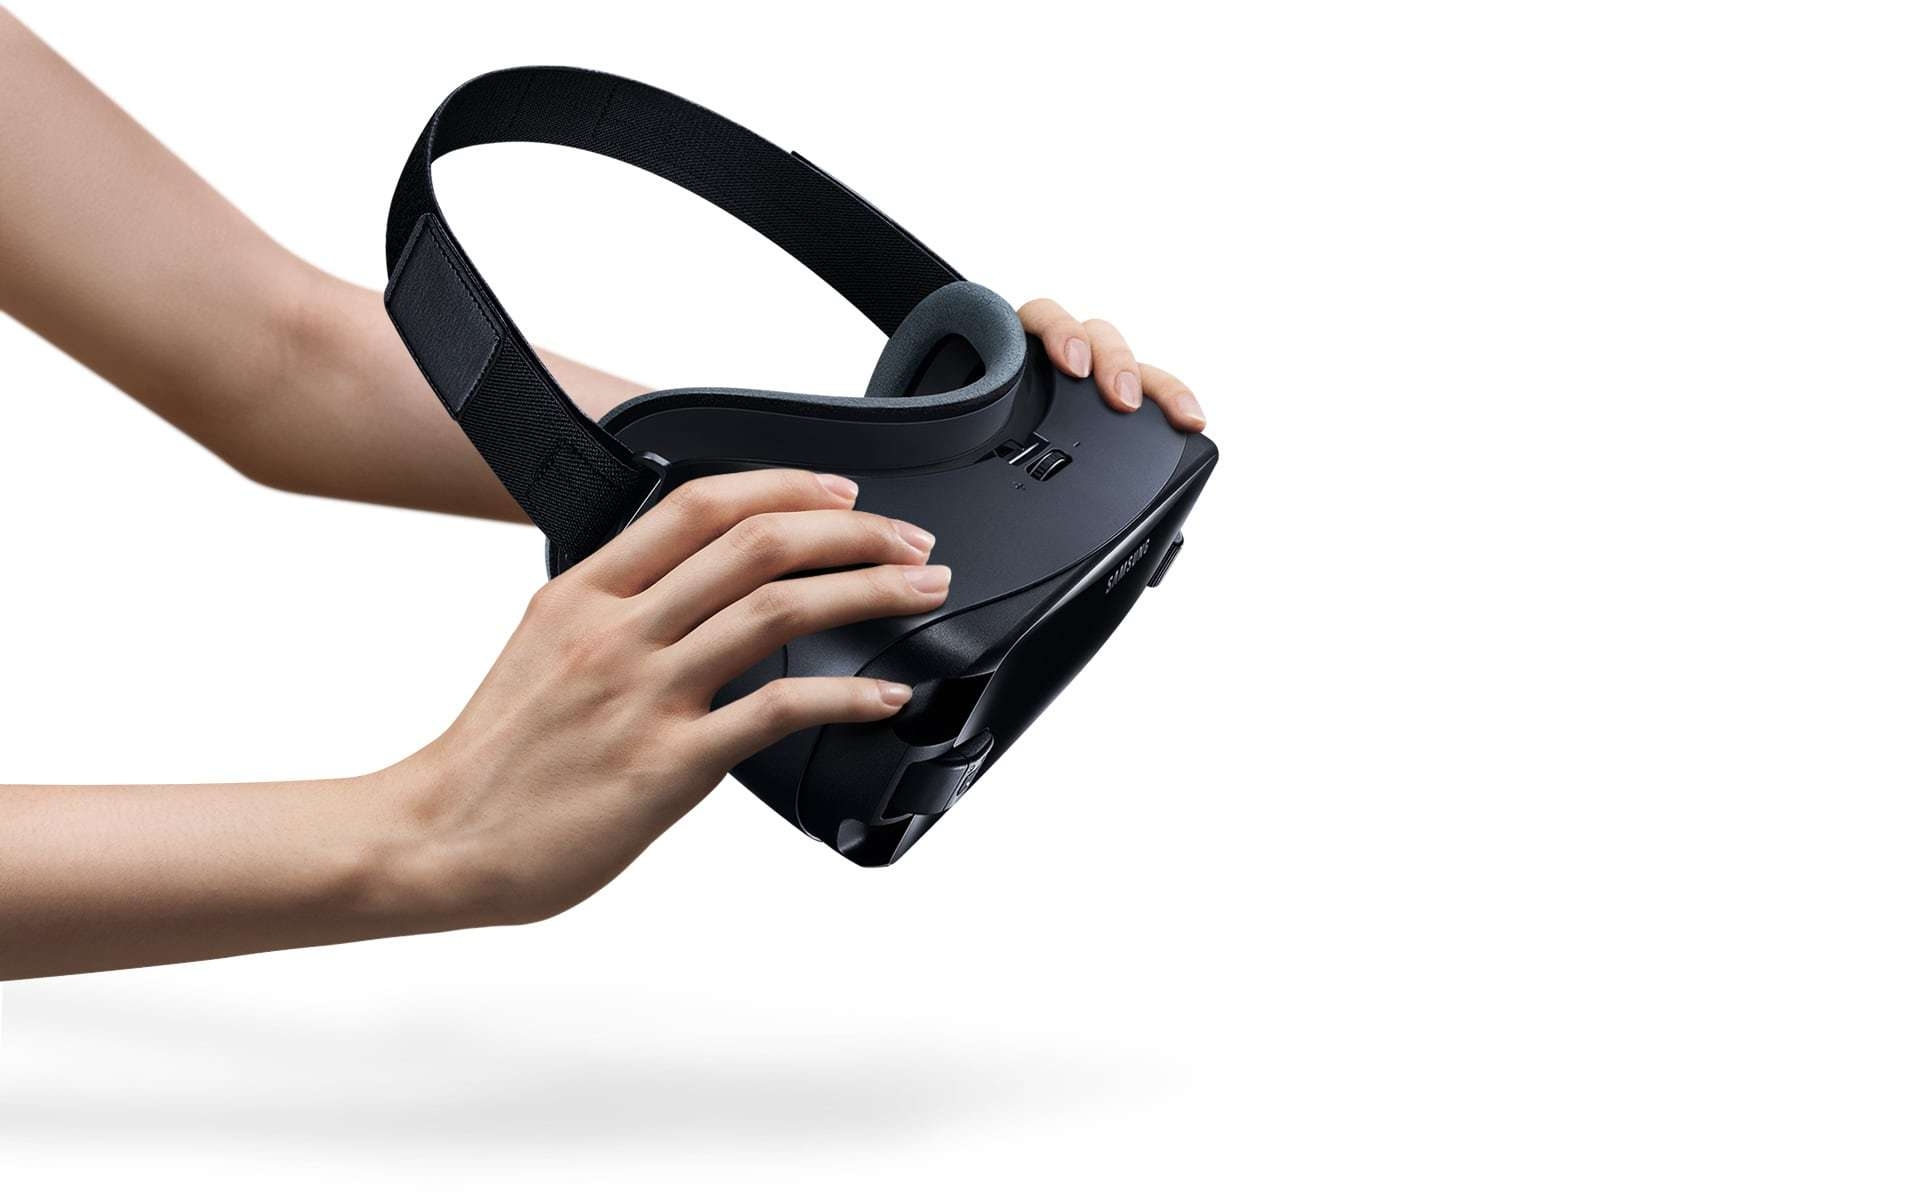 Hands holding the Gear VR as if to put it on